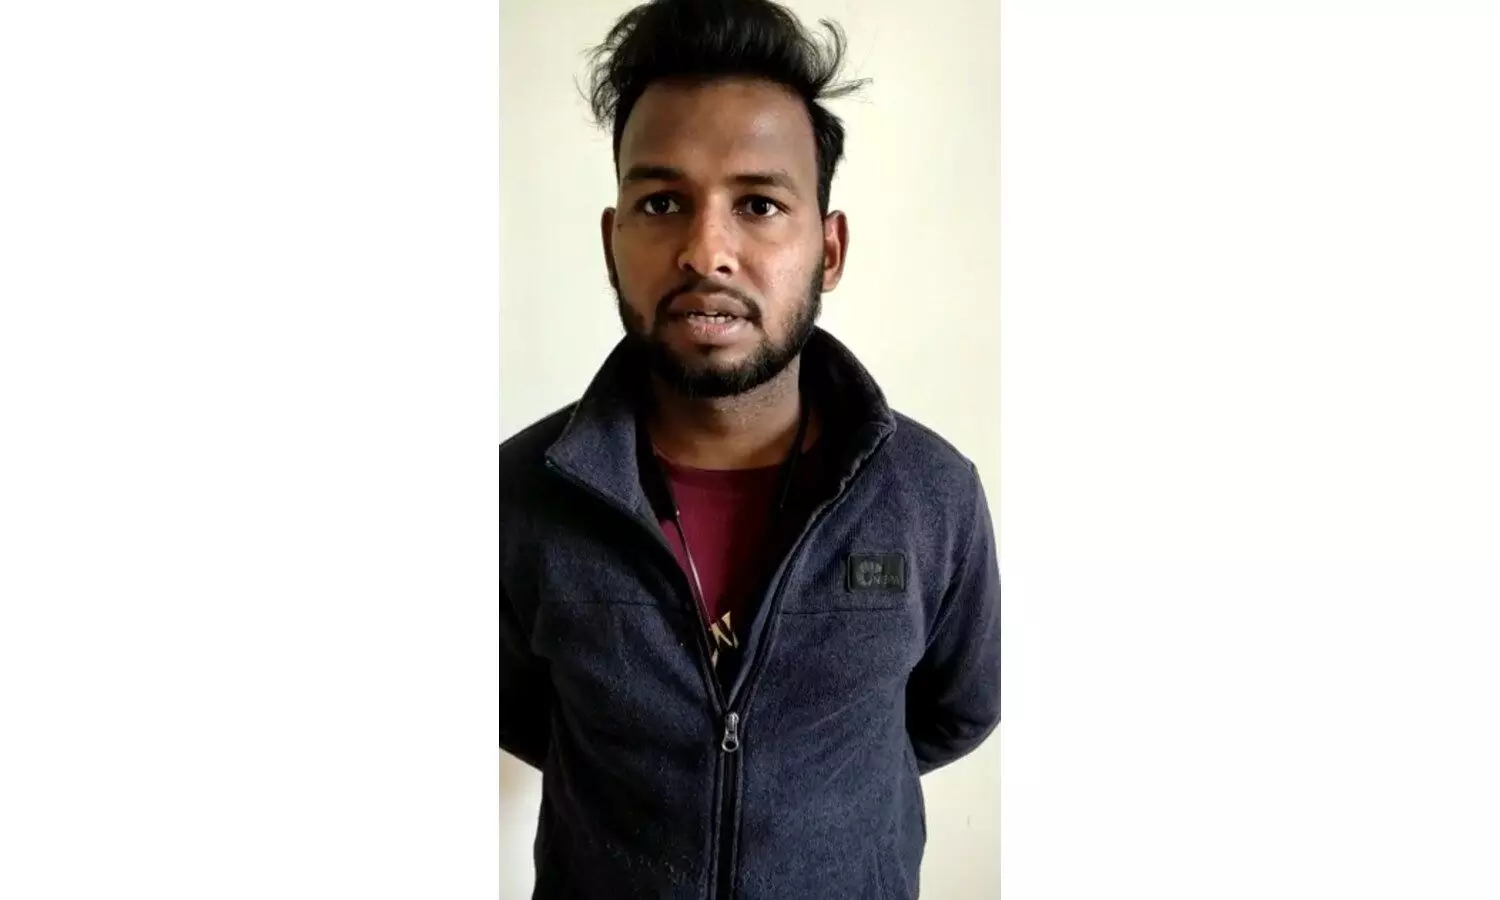 Etawah Cyber ​​cell returned Rs 44883 to the victim